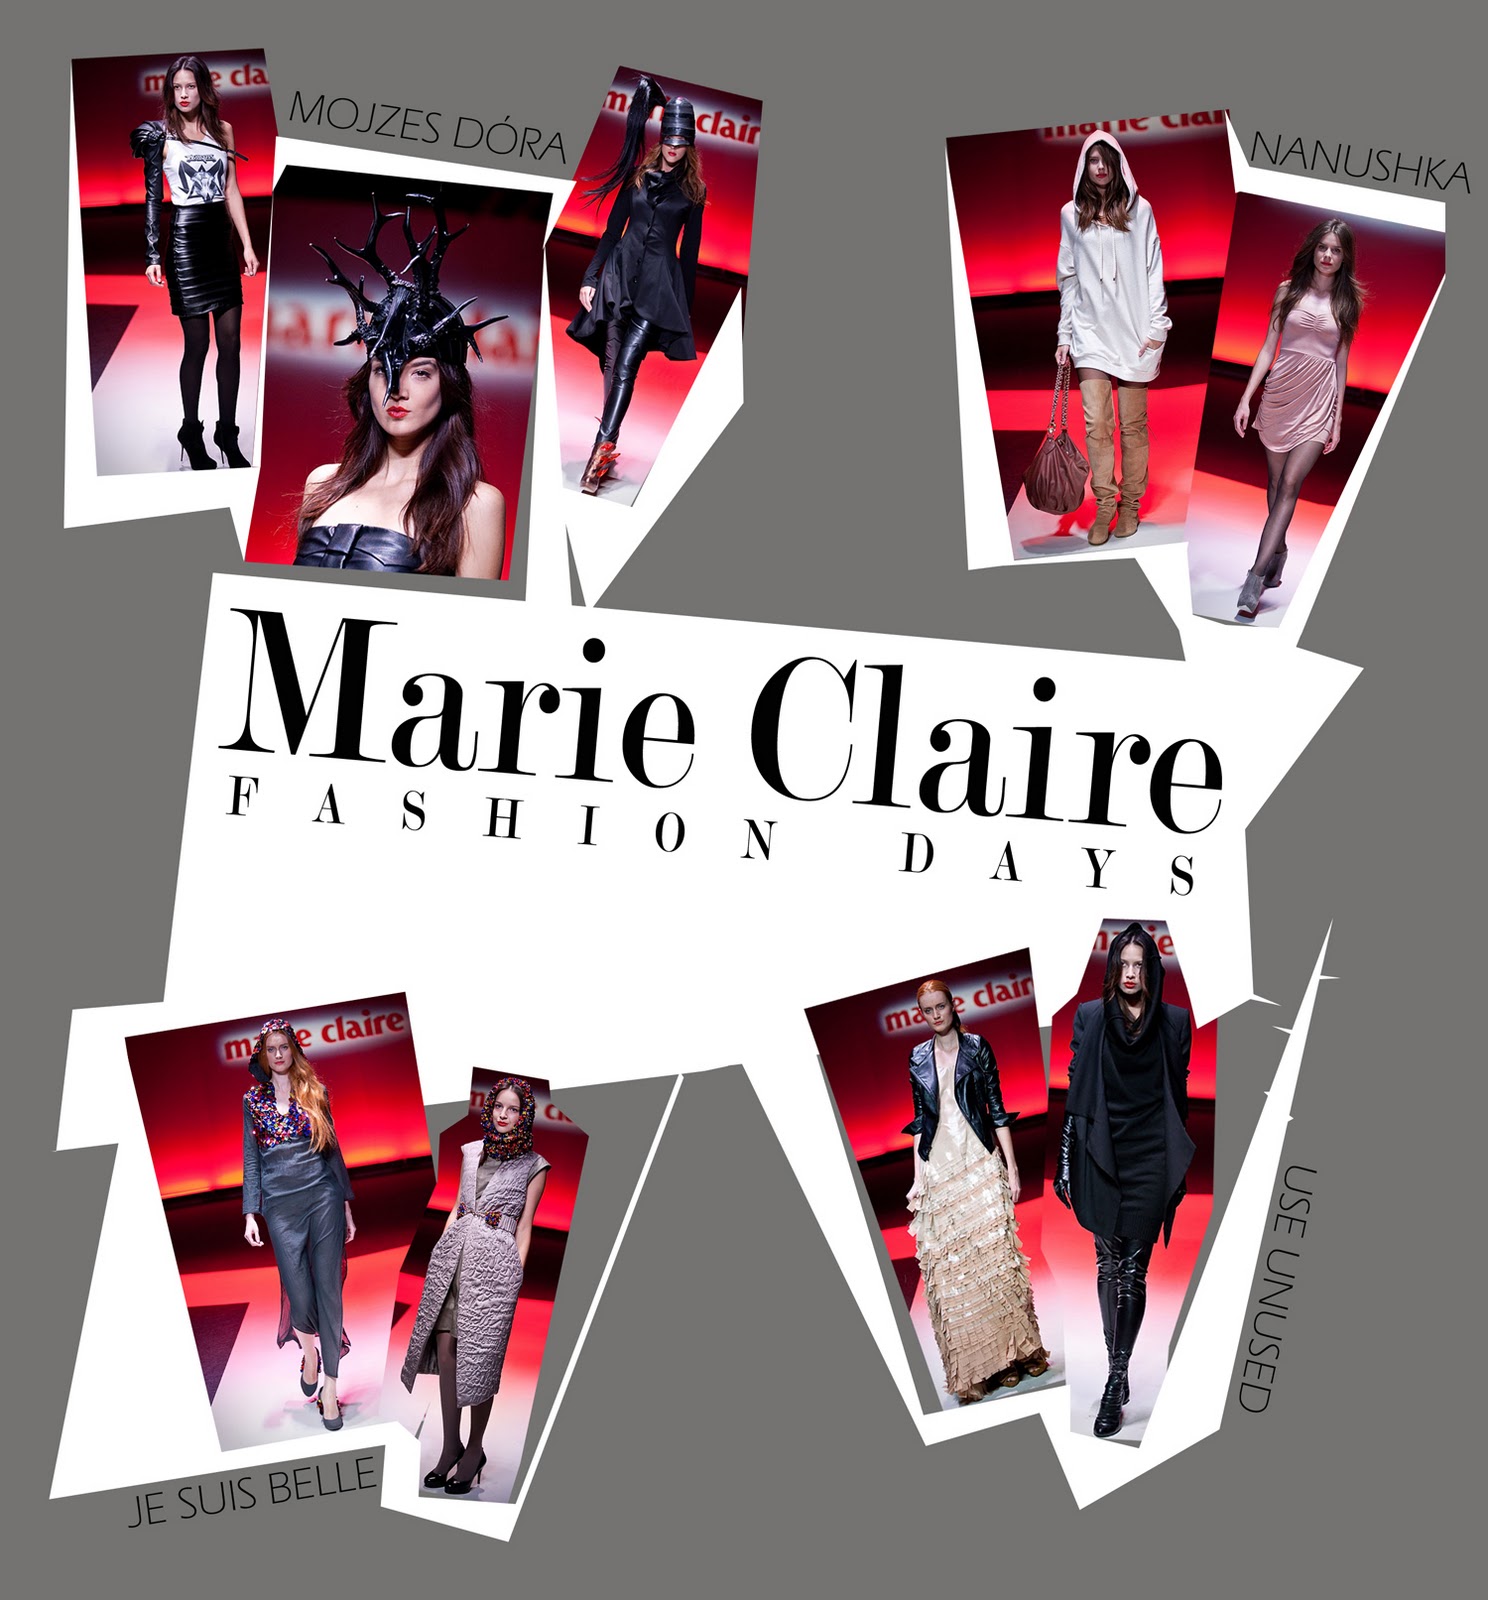 Marie Claire Fashion Days 2010